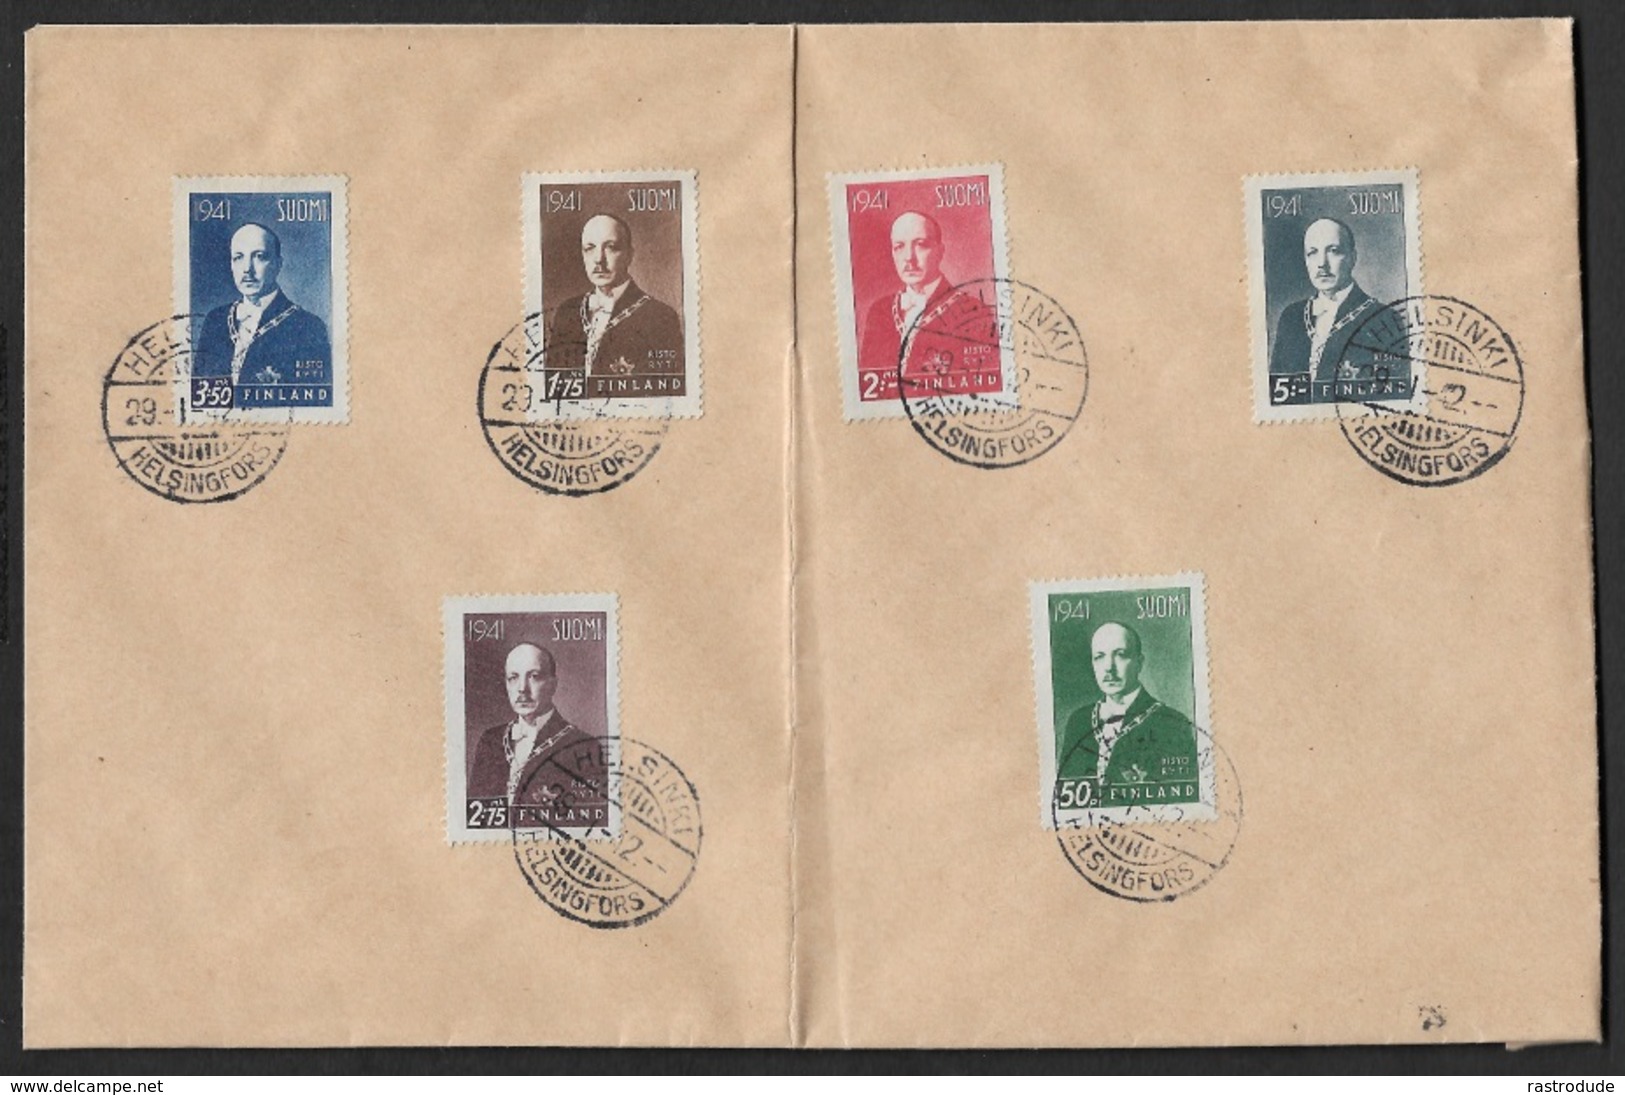 Finland - Cover 1941 Commemoratives -  RISTO RYTI - Cds - Helsinki 29-1-42 - Complete Set - Covers & Documents